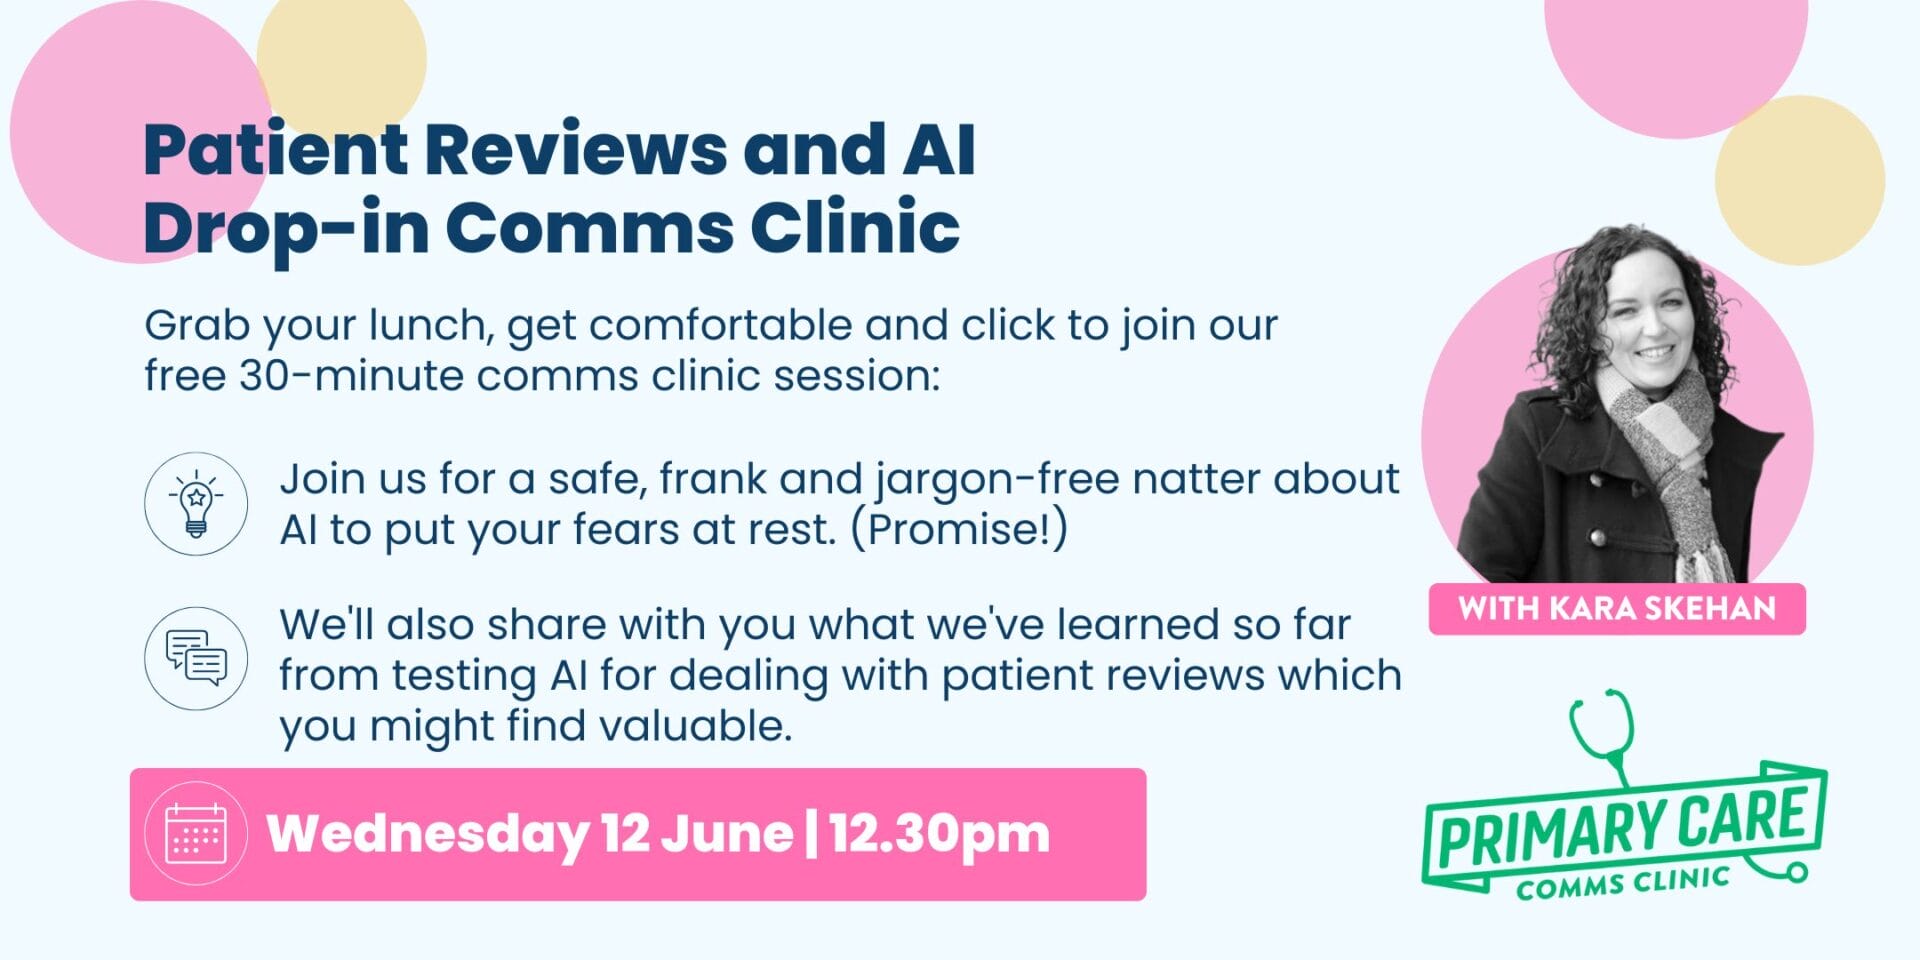 Drop-in Comms Clinic: Patient Reviews and AI